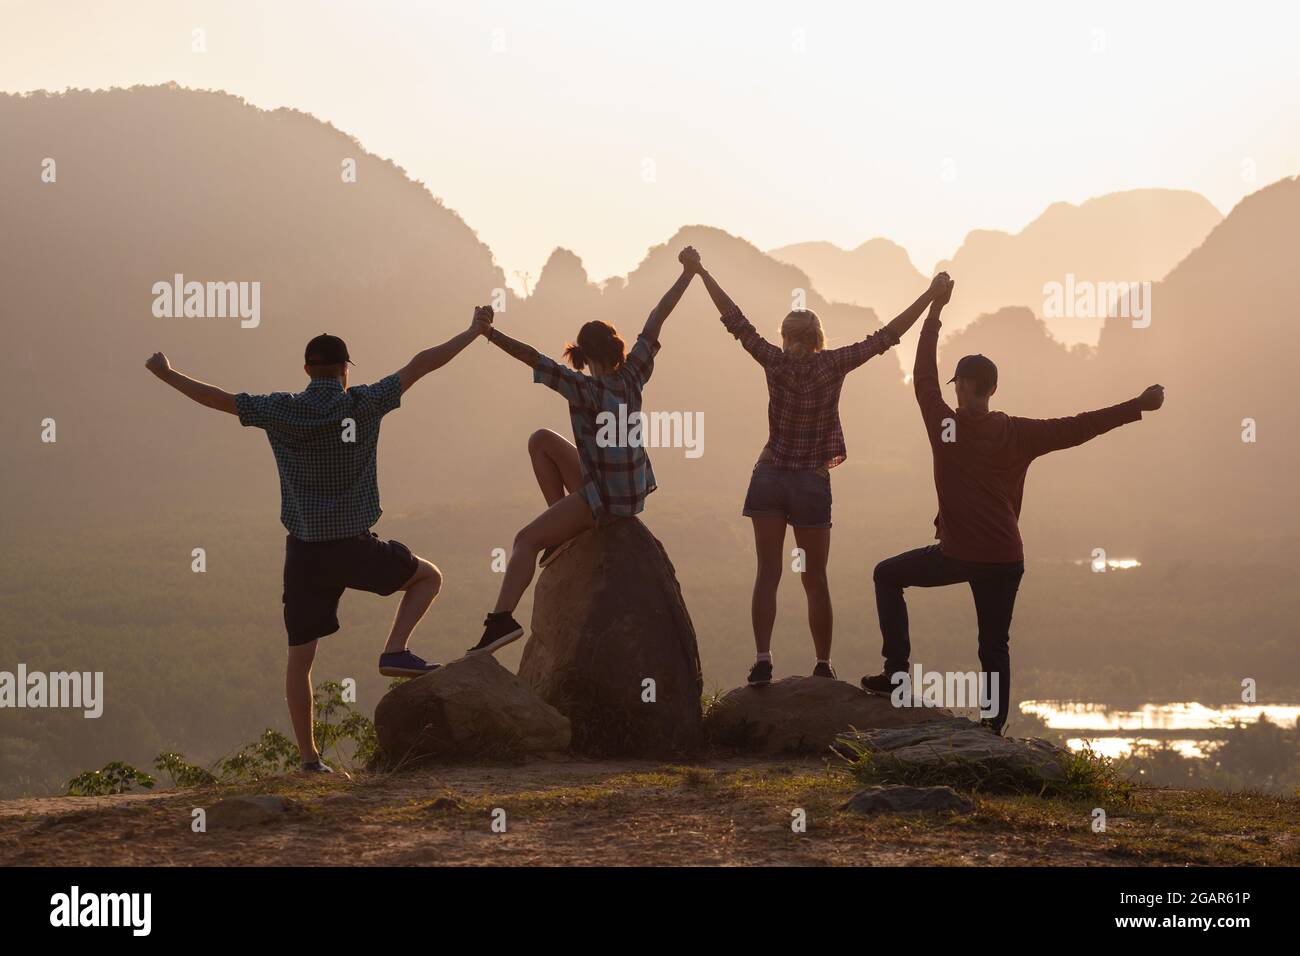 Togetherness concept with four silhouettes of young friends standing against sunrise and mountains Stock Photo